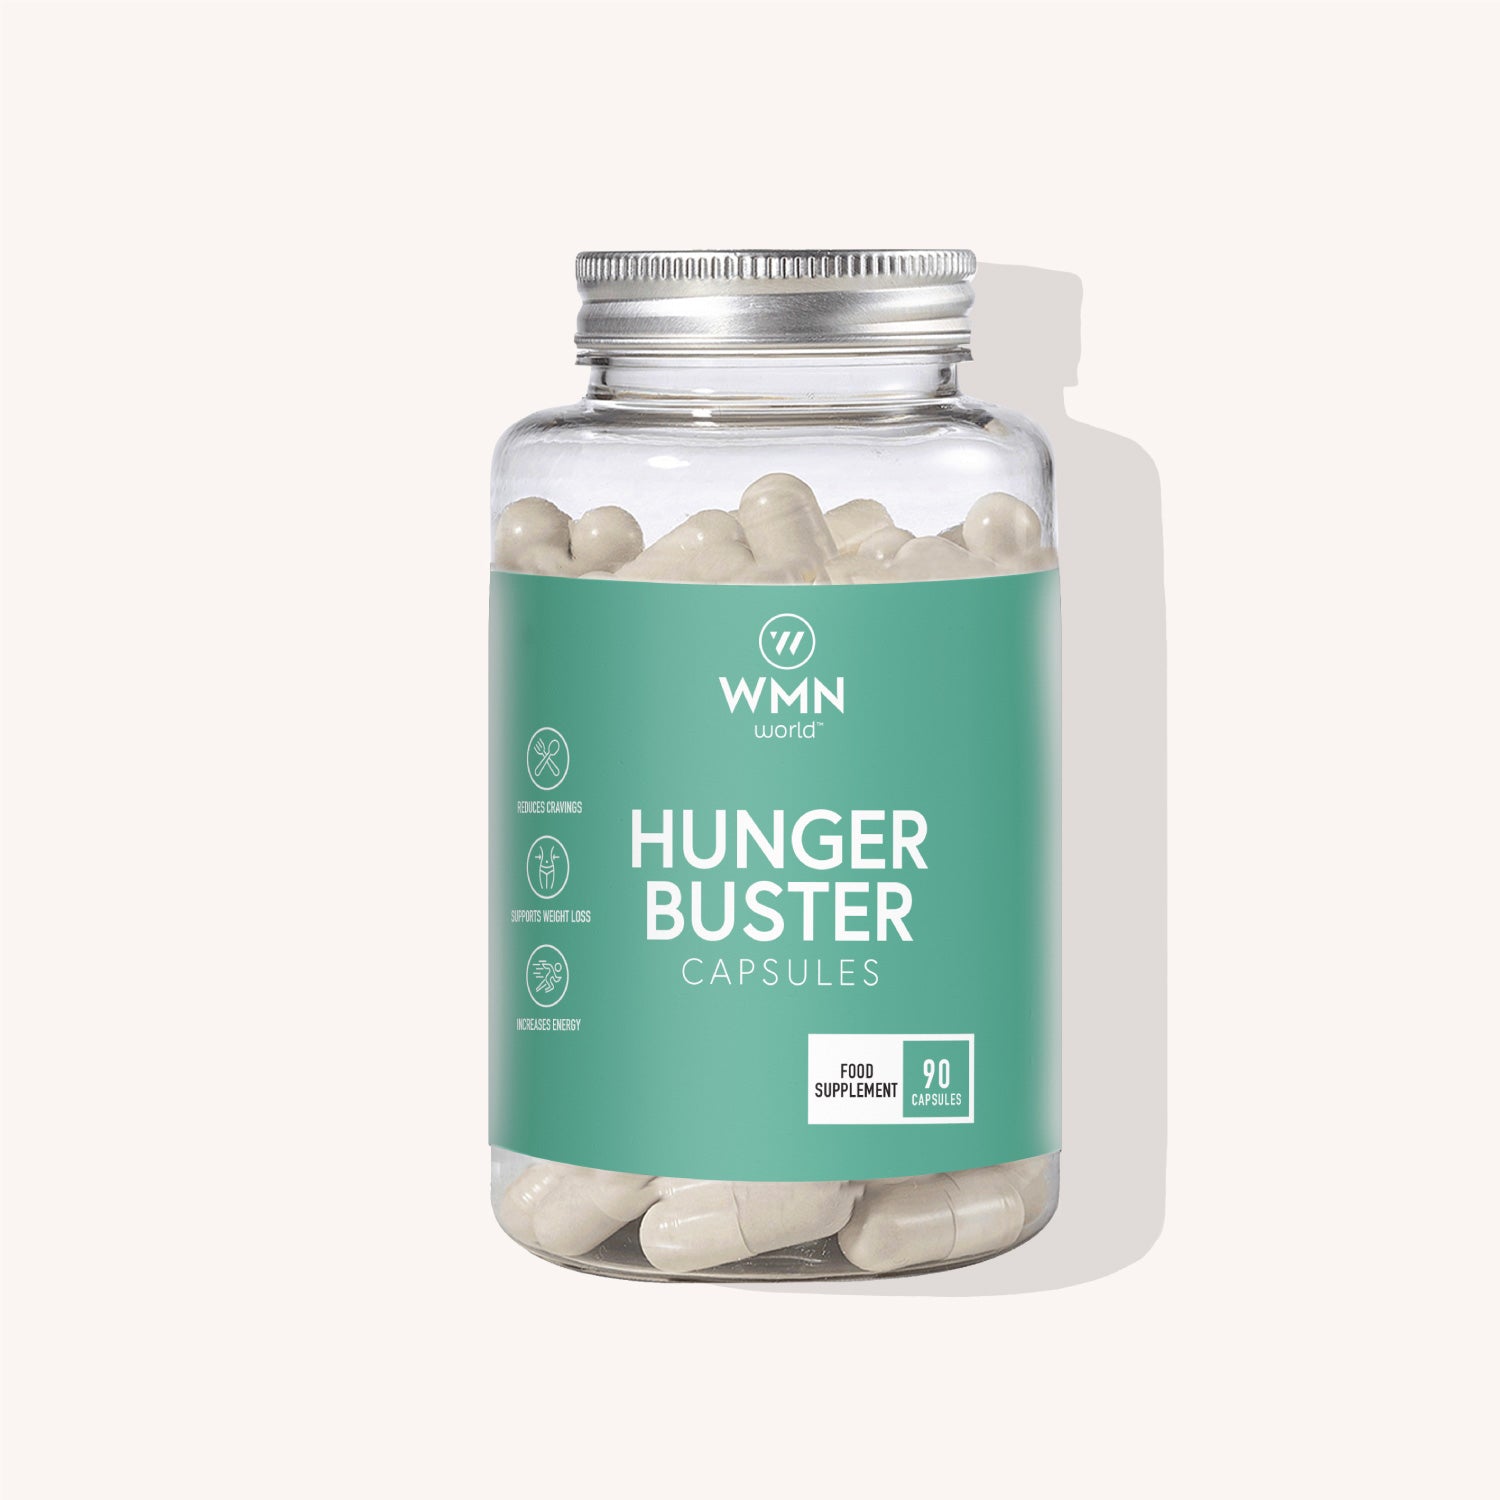 Hunger Buster Capsules